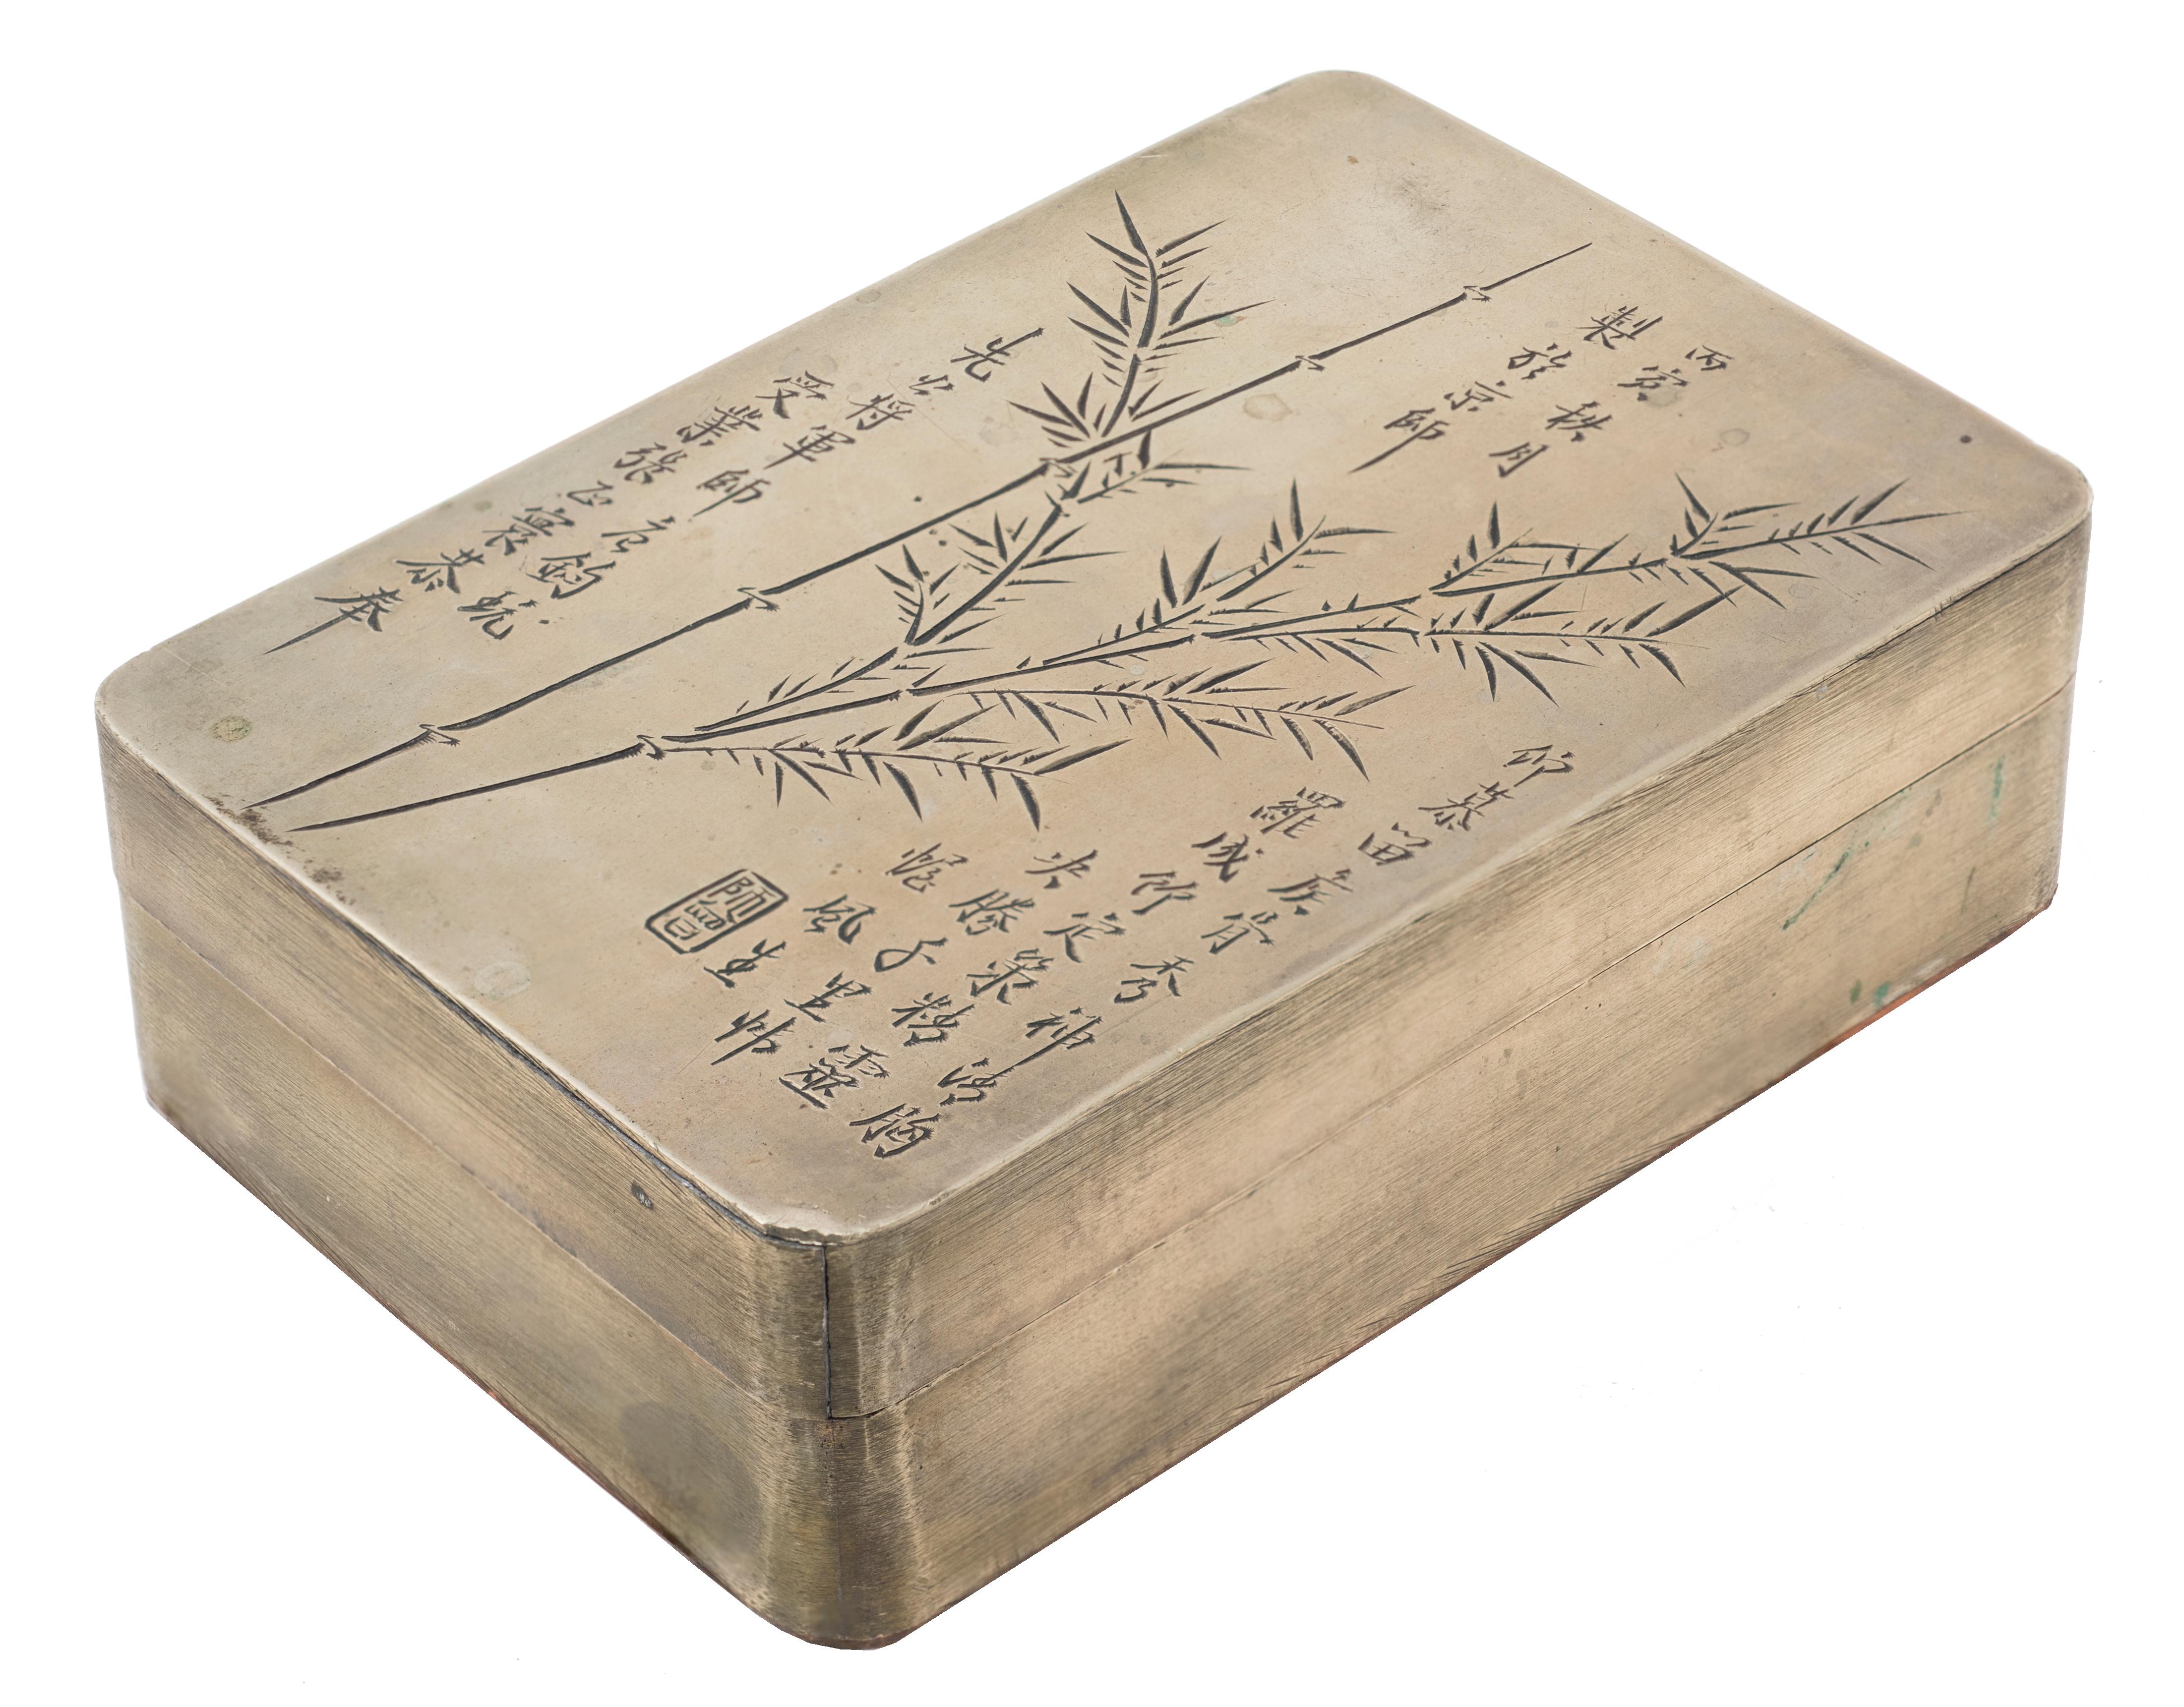 Vintage Chinese metal box decorated on top with engravings of bambù plant and Chinese words.
Good conditions.

This object is shipped from Italy. Under existing legislation, any object in Italy created over 70 years ago by an artist who has died